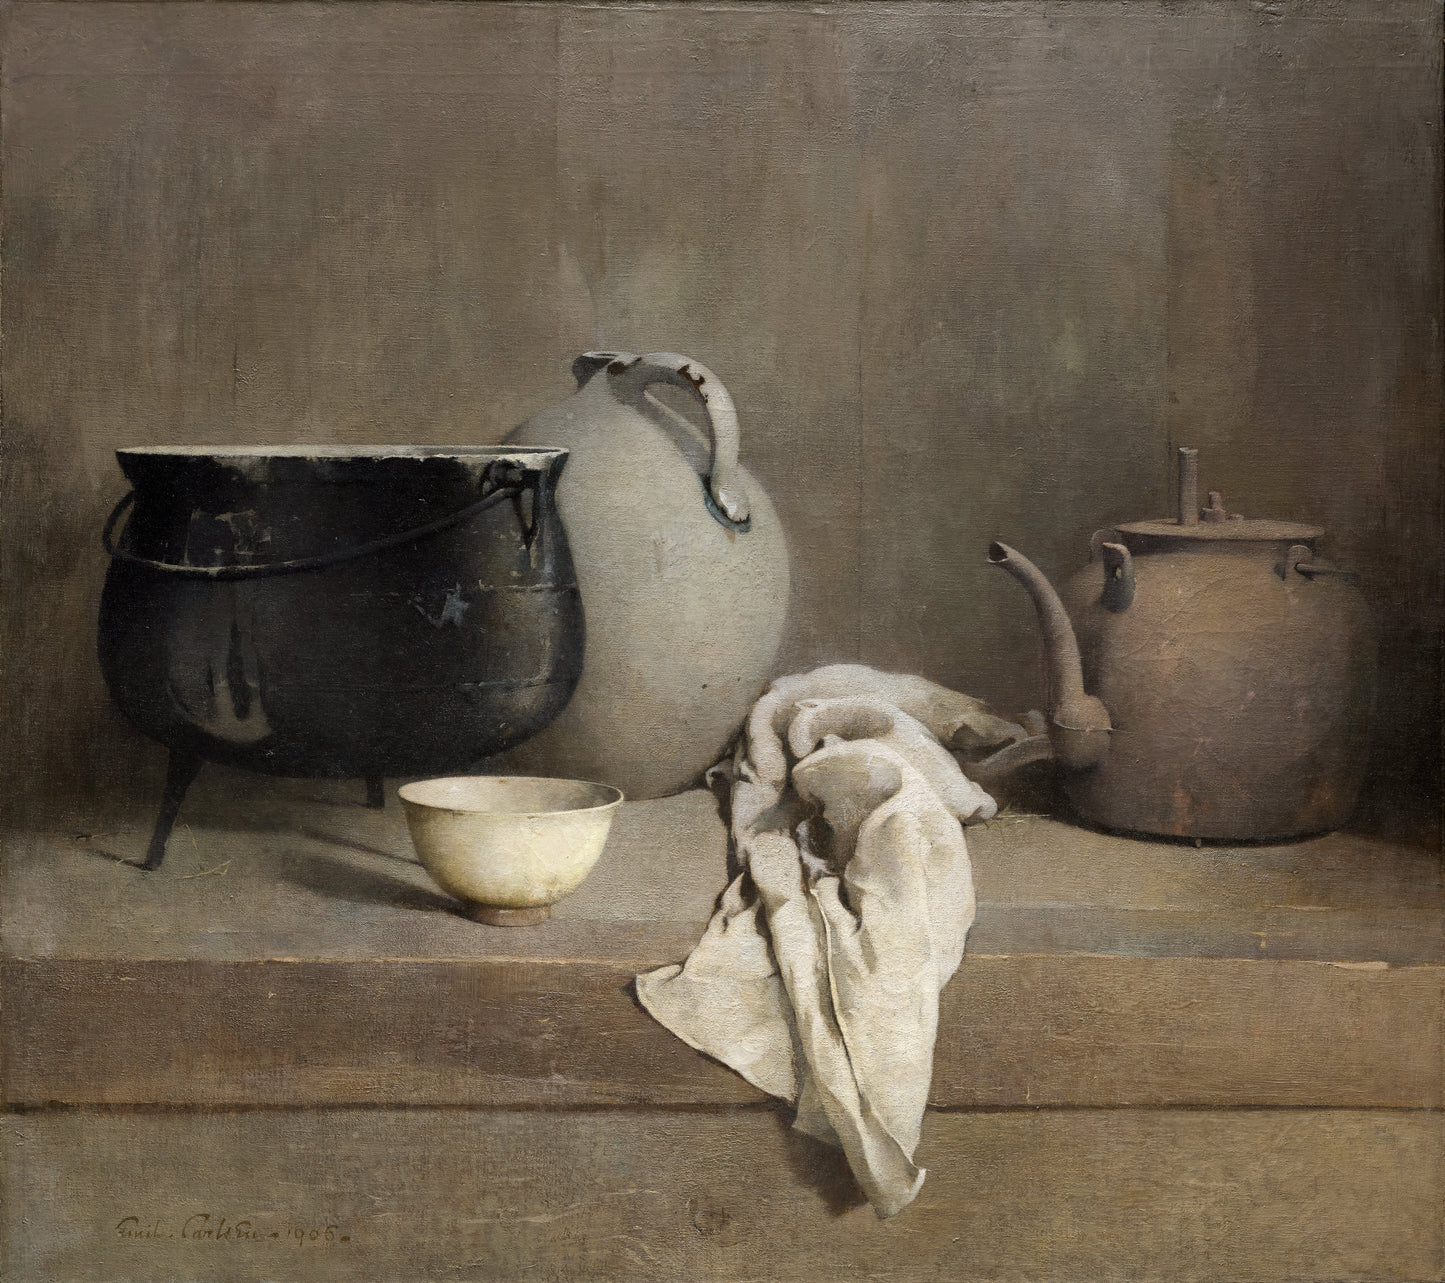 Still life in shades of grey. Oil on canvas  Original by Emil Carlsen 1906. Fine art prints by The Vintage Art Market.